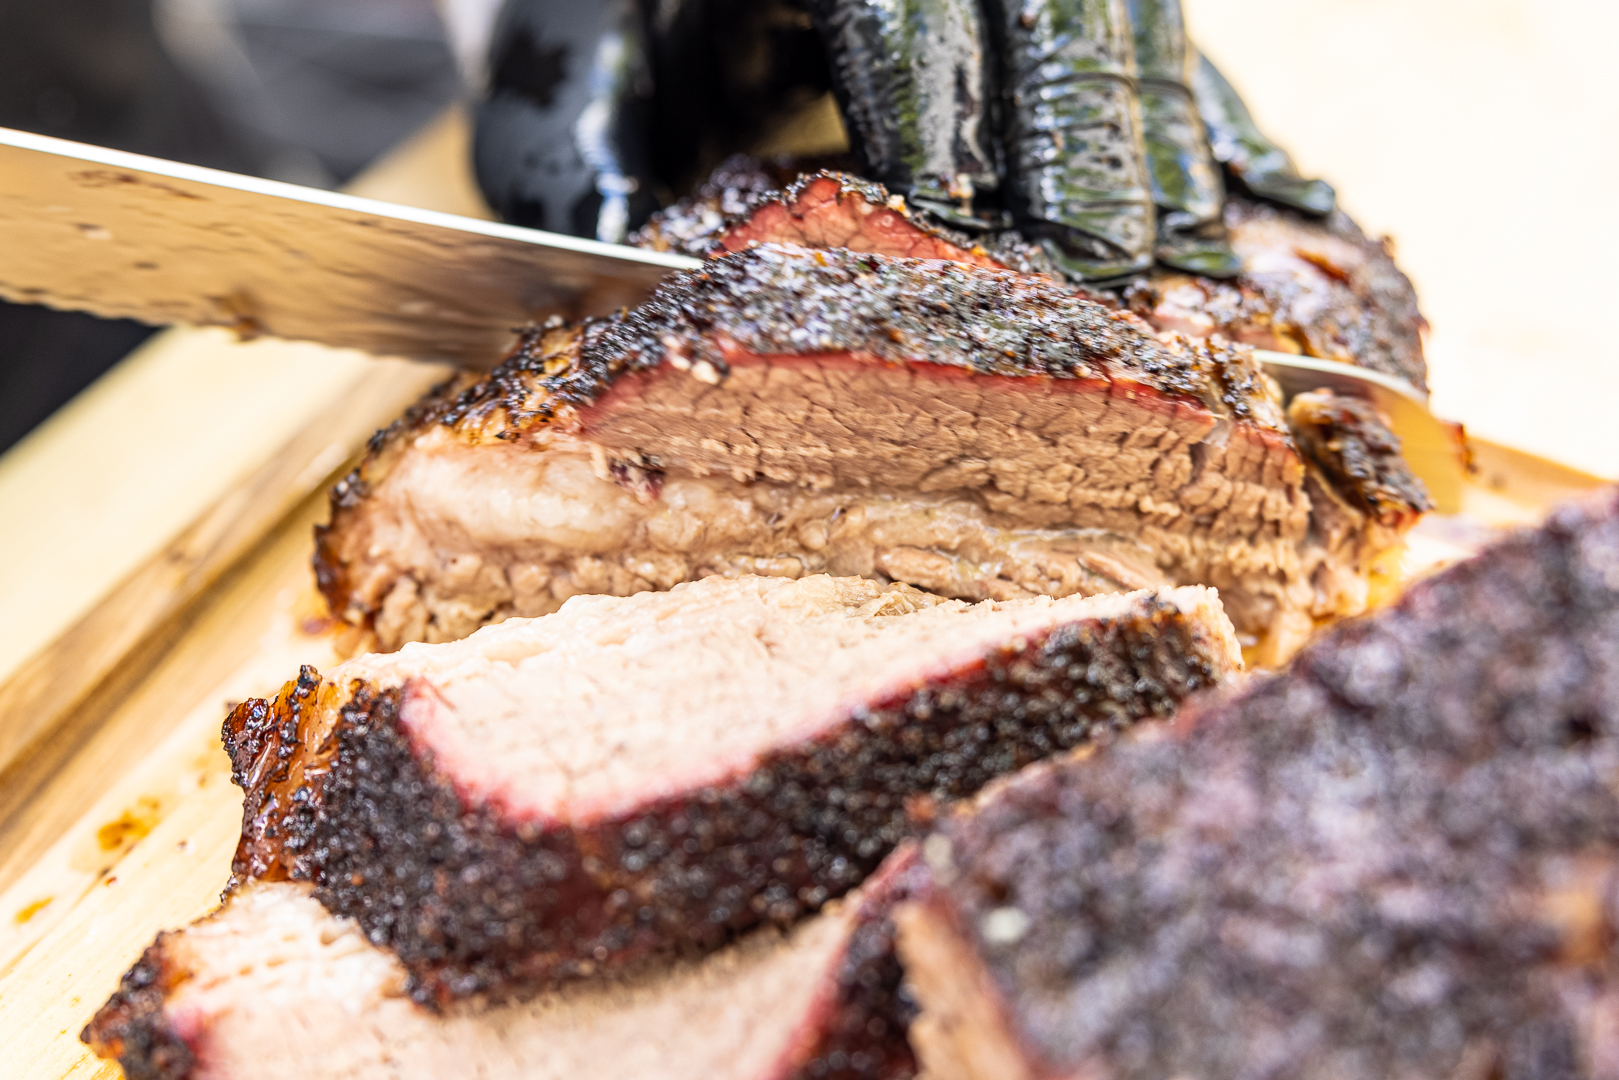 Slicing the point of the brisket